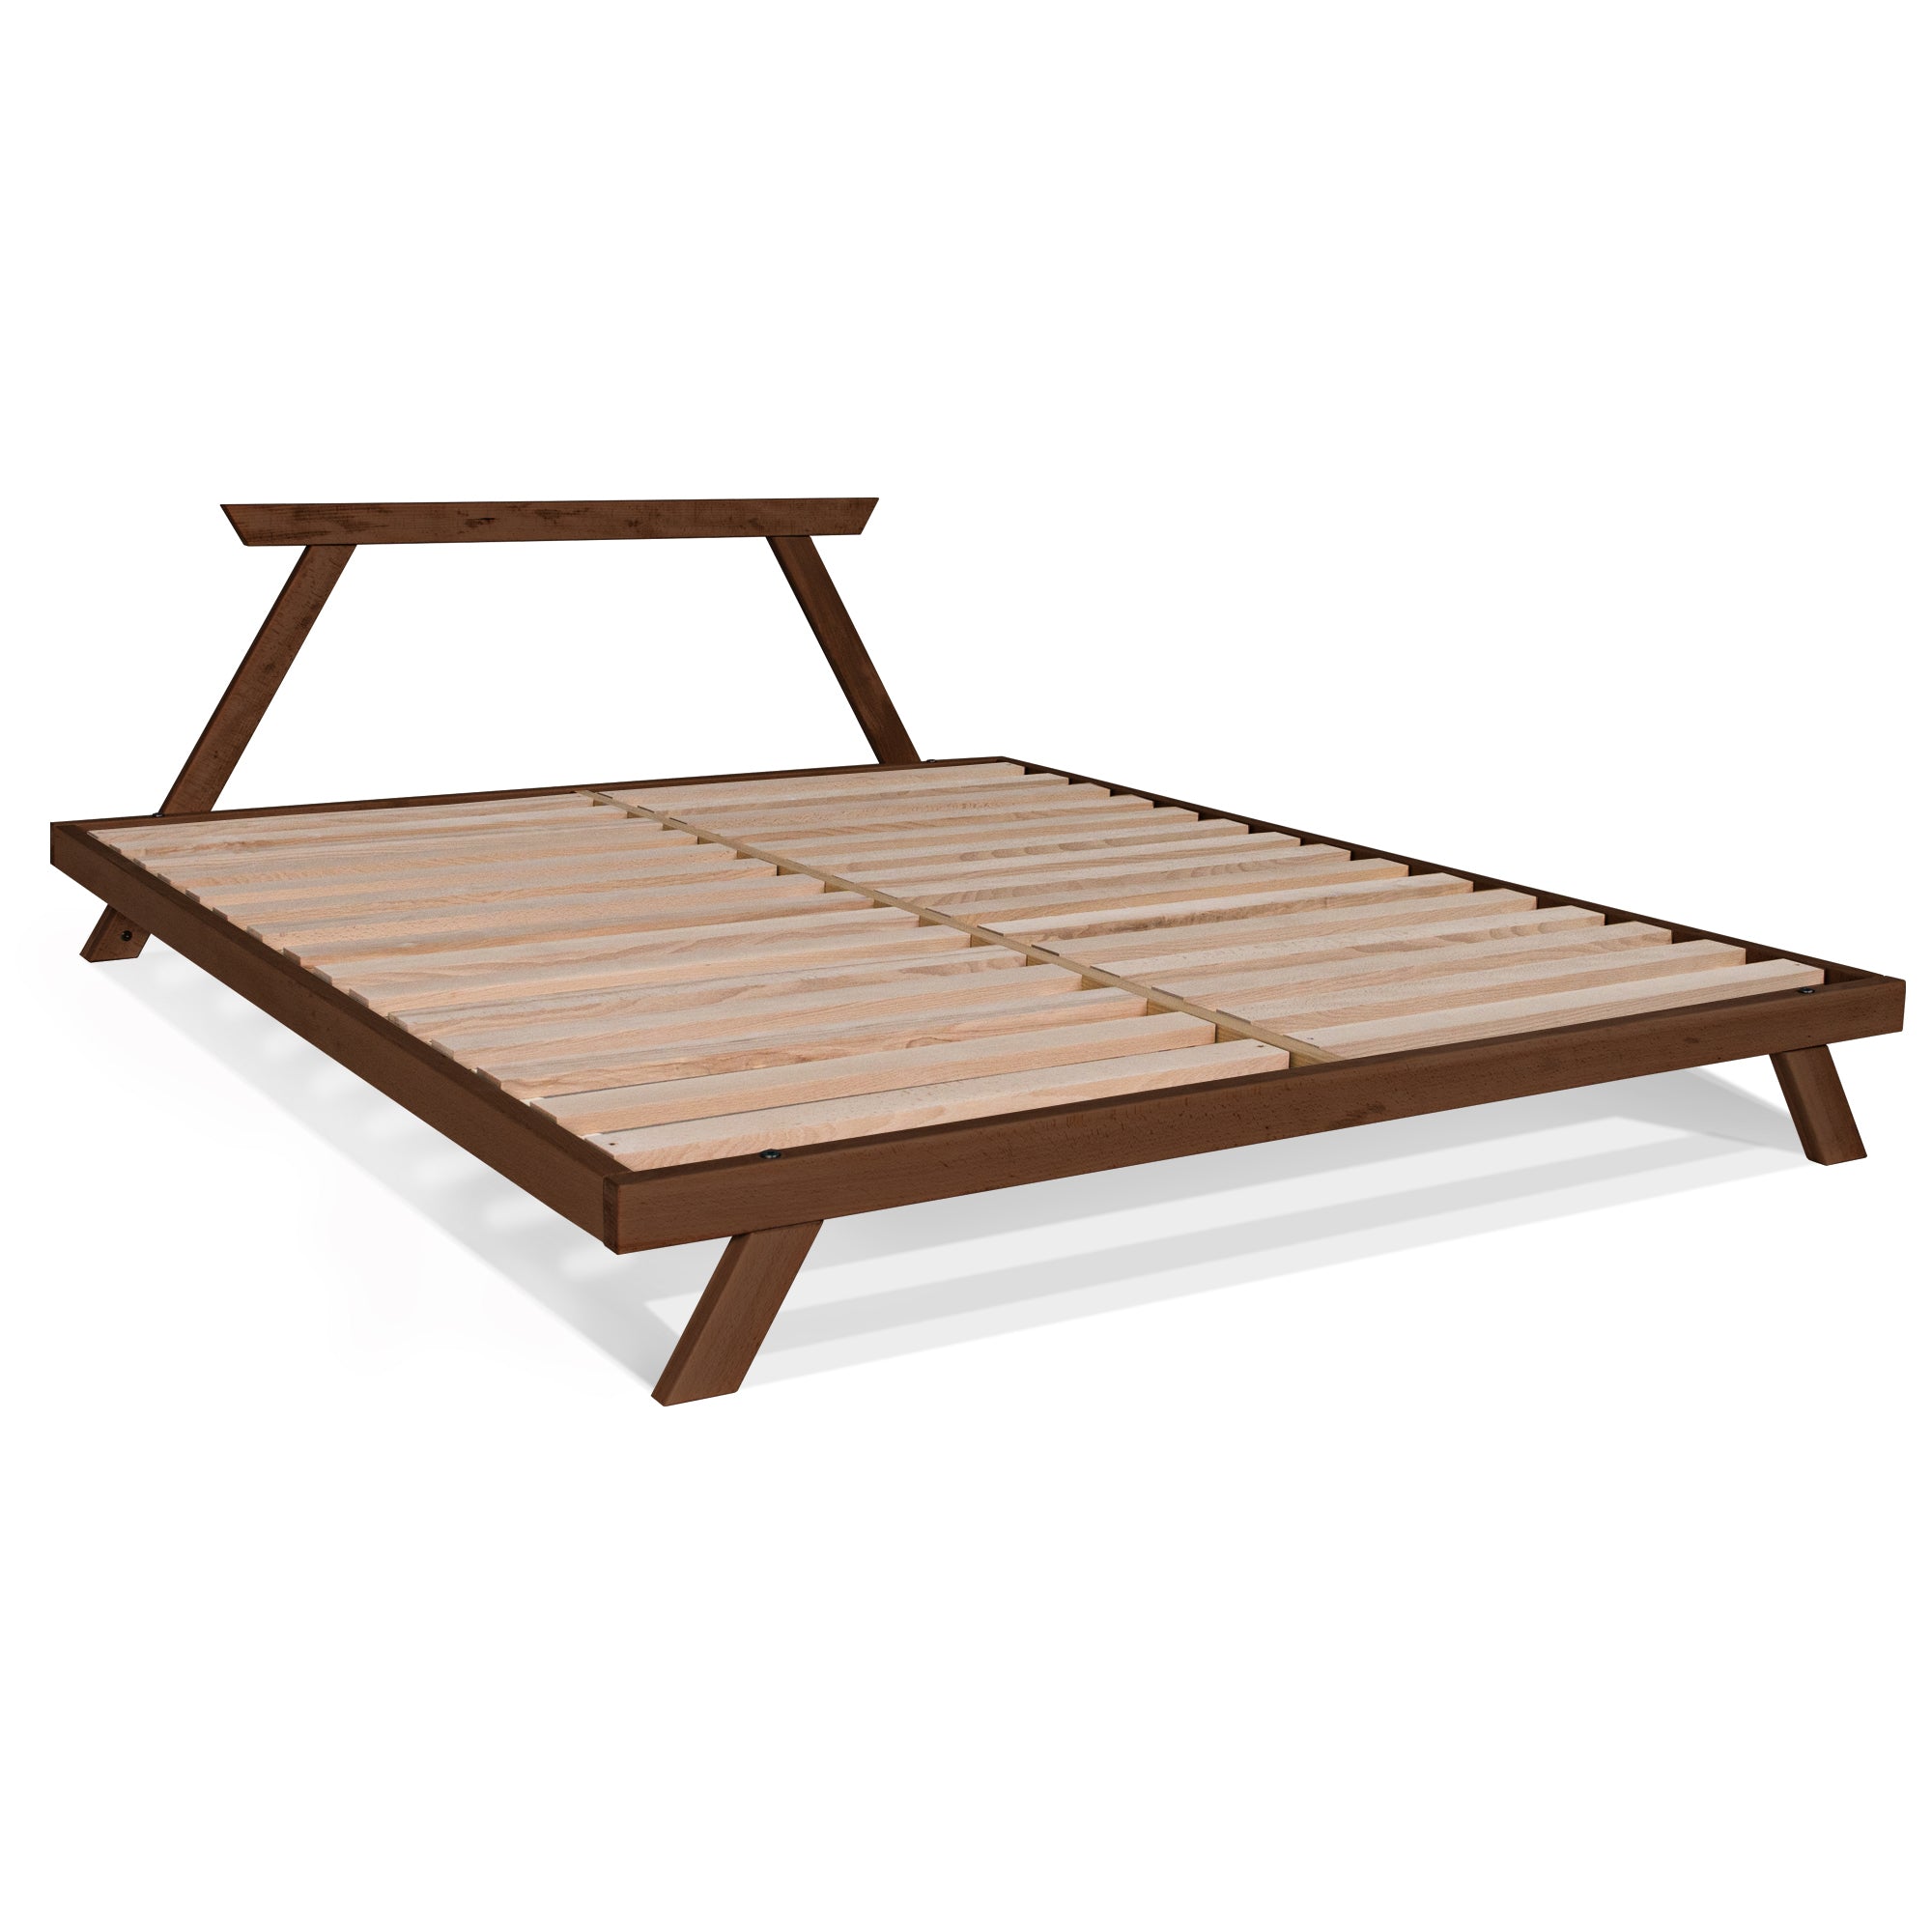 ALLEGRO Double Bed, Beech Wood walnut frame-without mattress